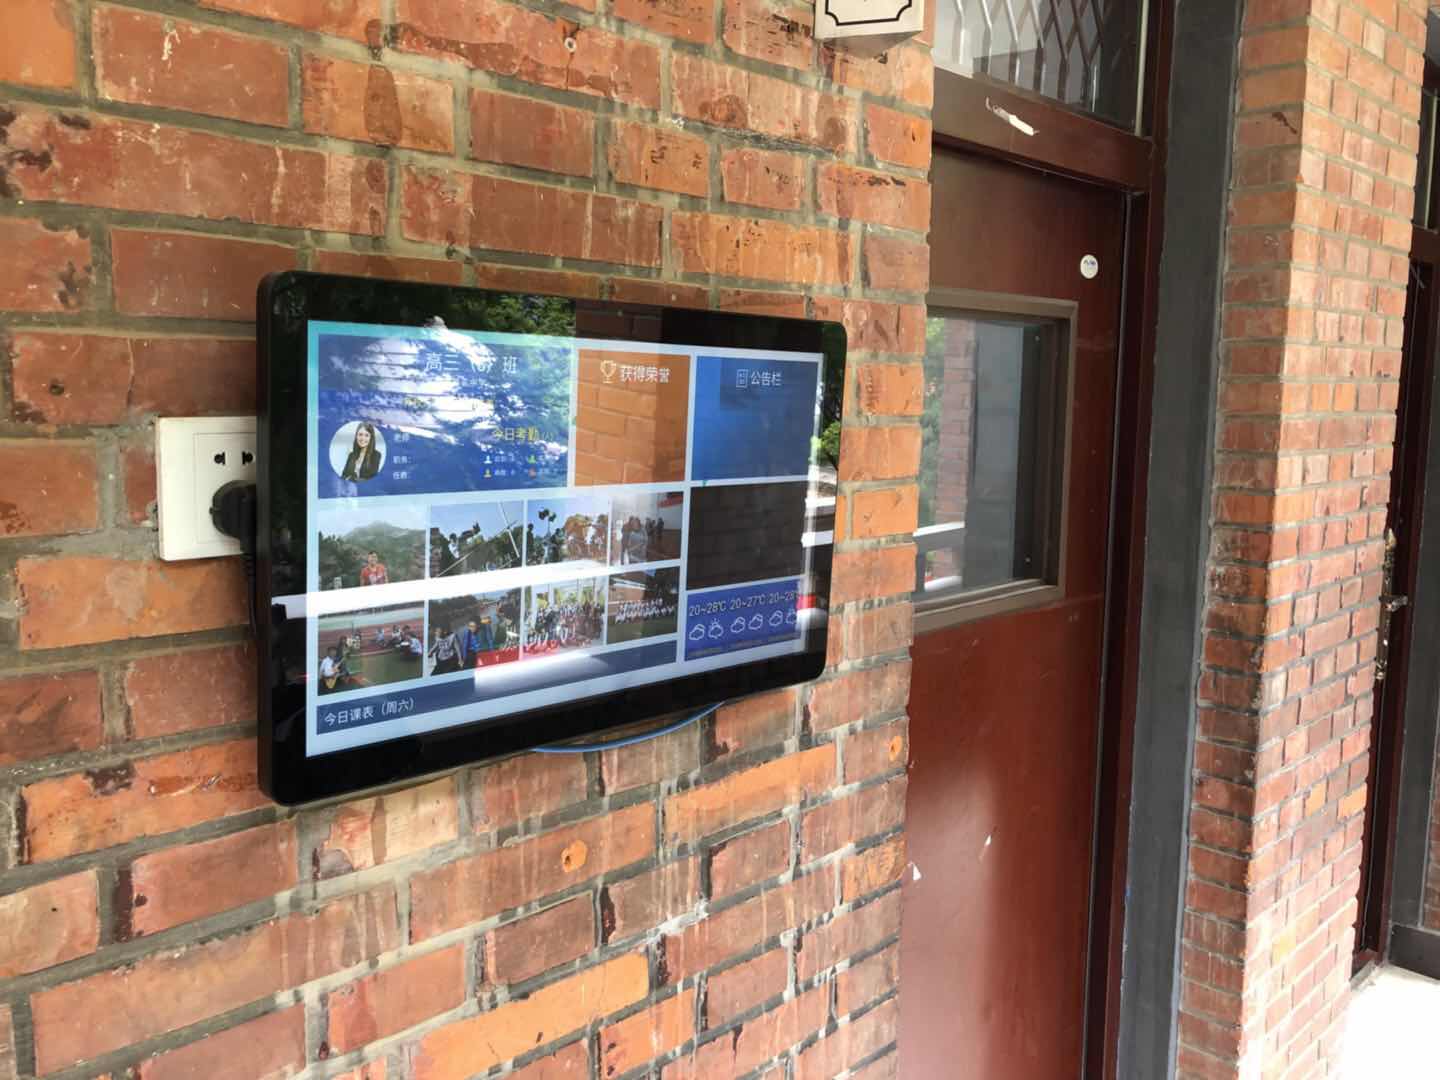 【EDUCATION】Touchwo information board made the campus smarter